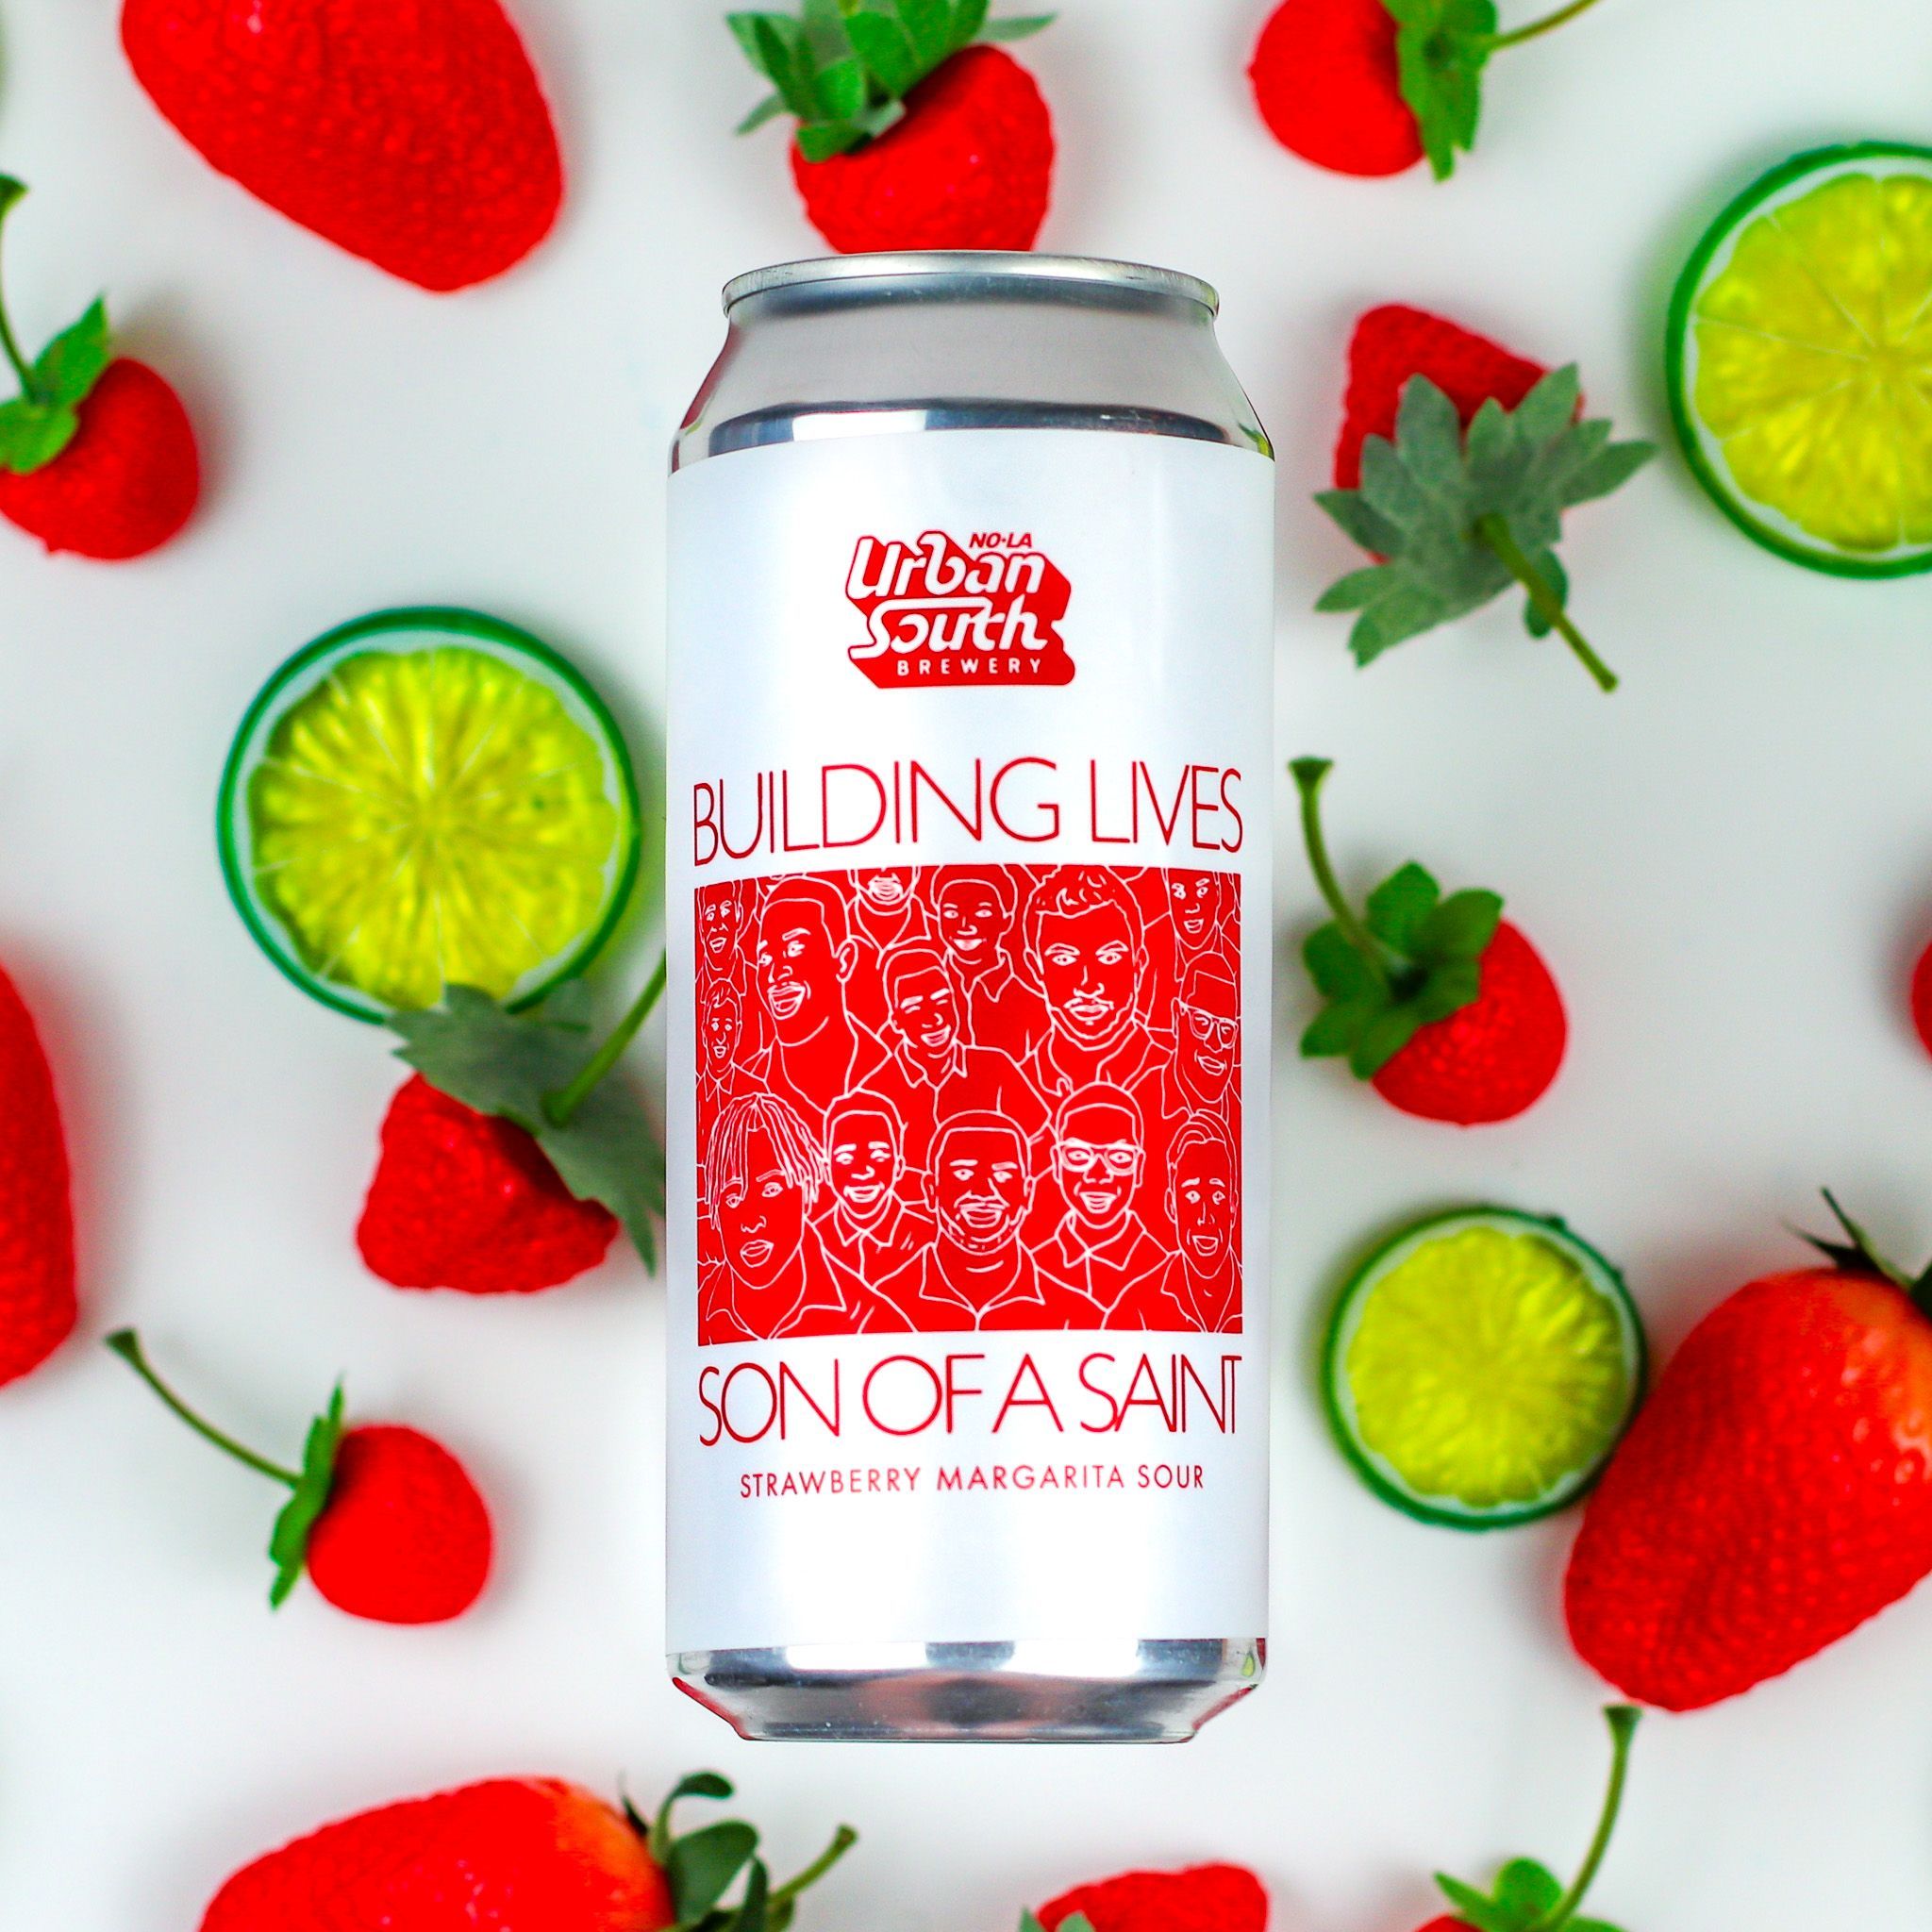 Urban South Brewery on X: Tomorrow, November 10th, we're dropping our new  Strawberry Margarita Sour in collaboration with Son of a Saint, a  non-profit organization that transforms the lives of fatherless boys